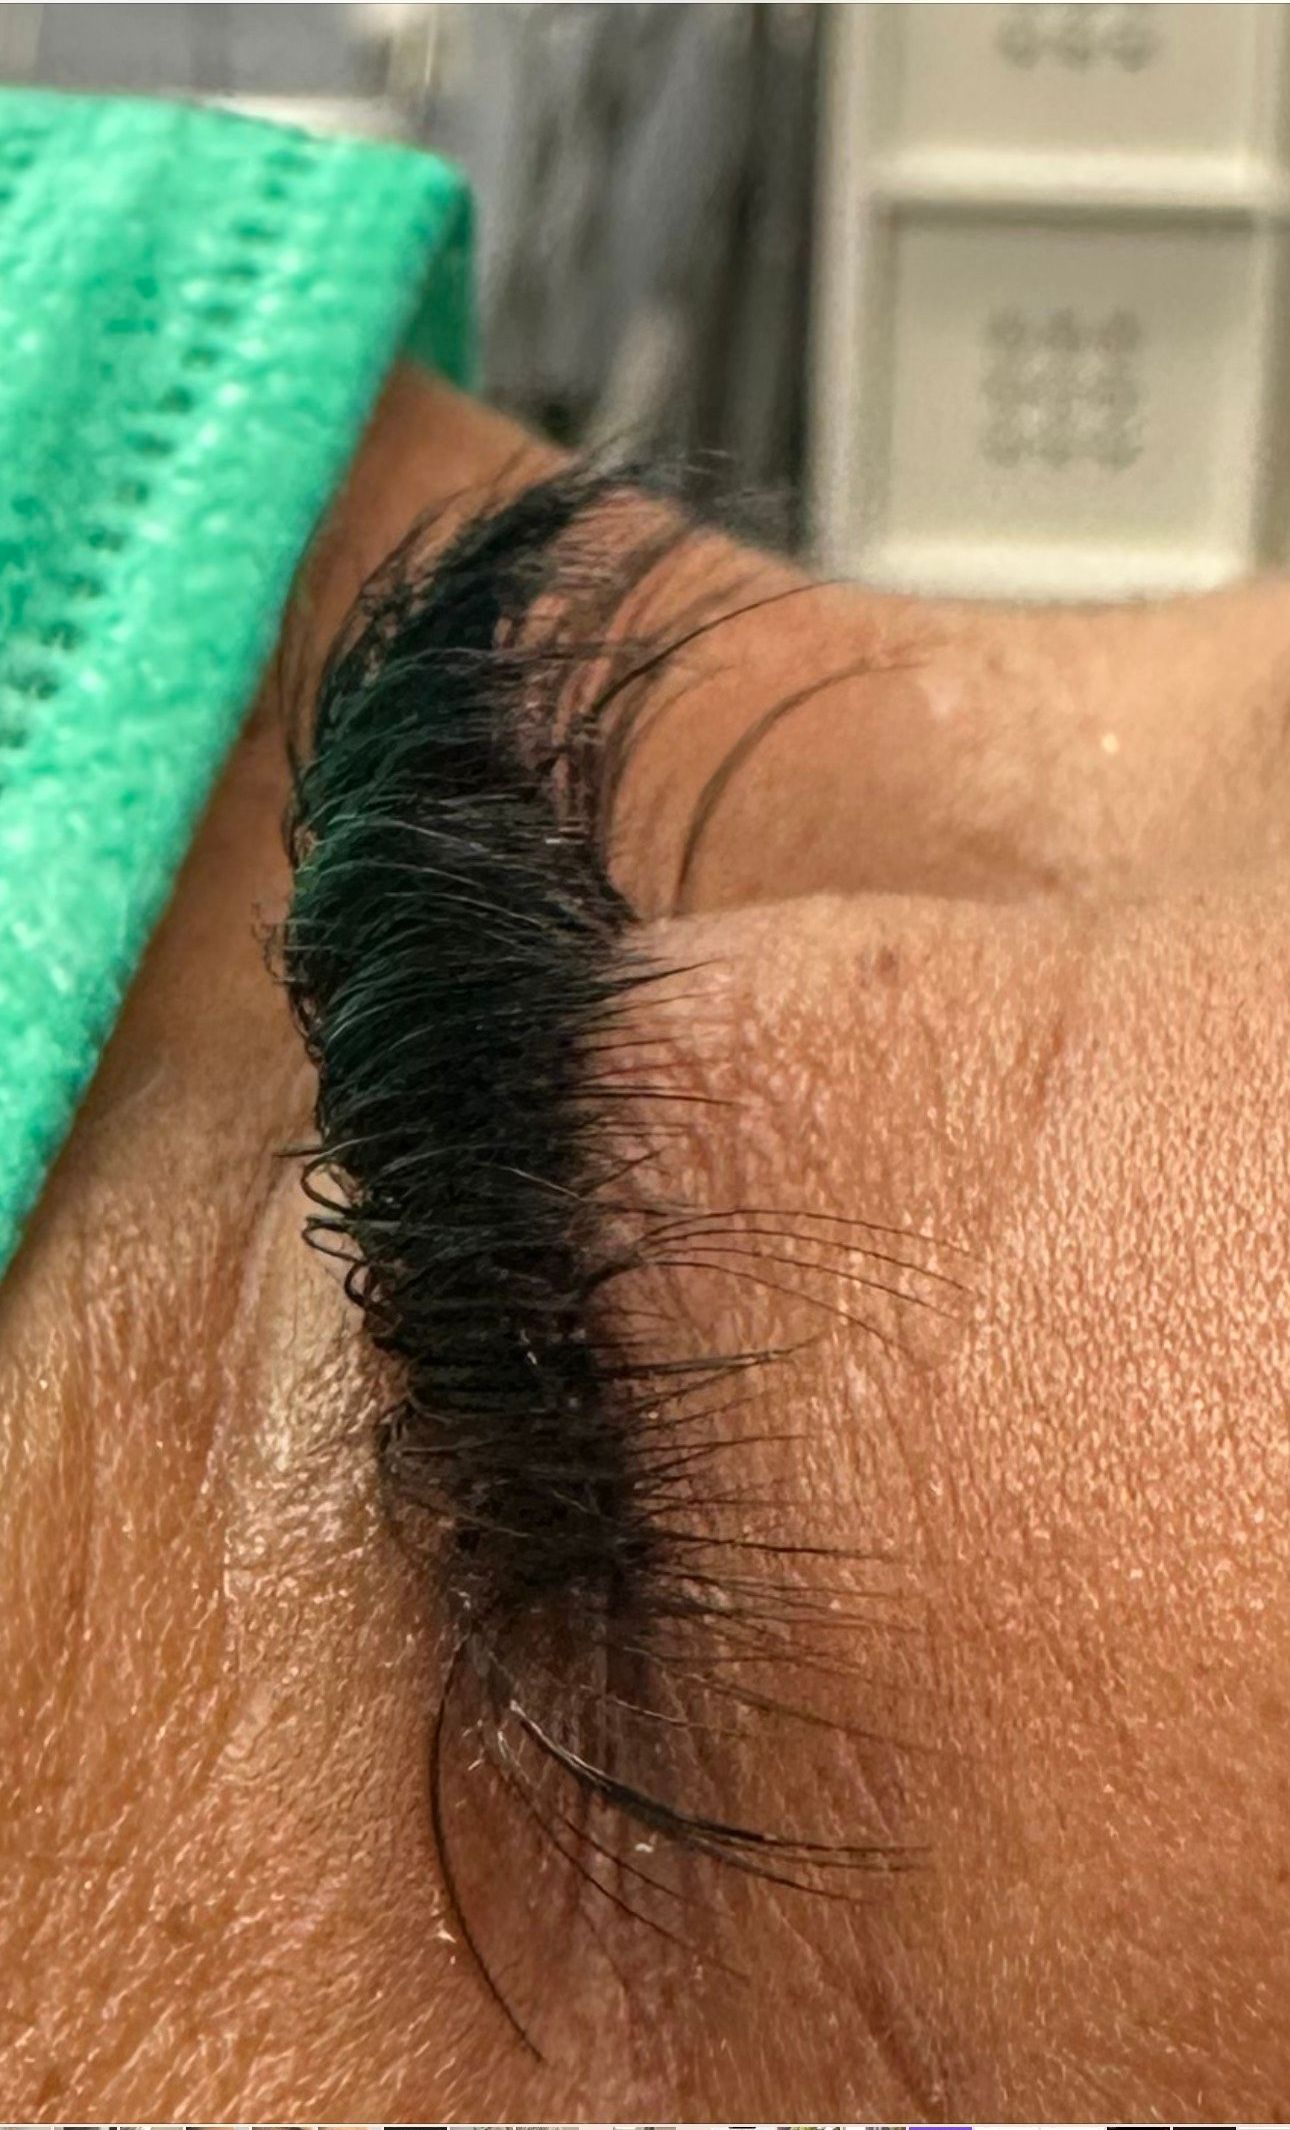 A close up of a person 's eye with long eyelashes.| St. Louis, MO | Lashing Out Loud